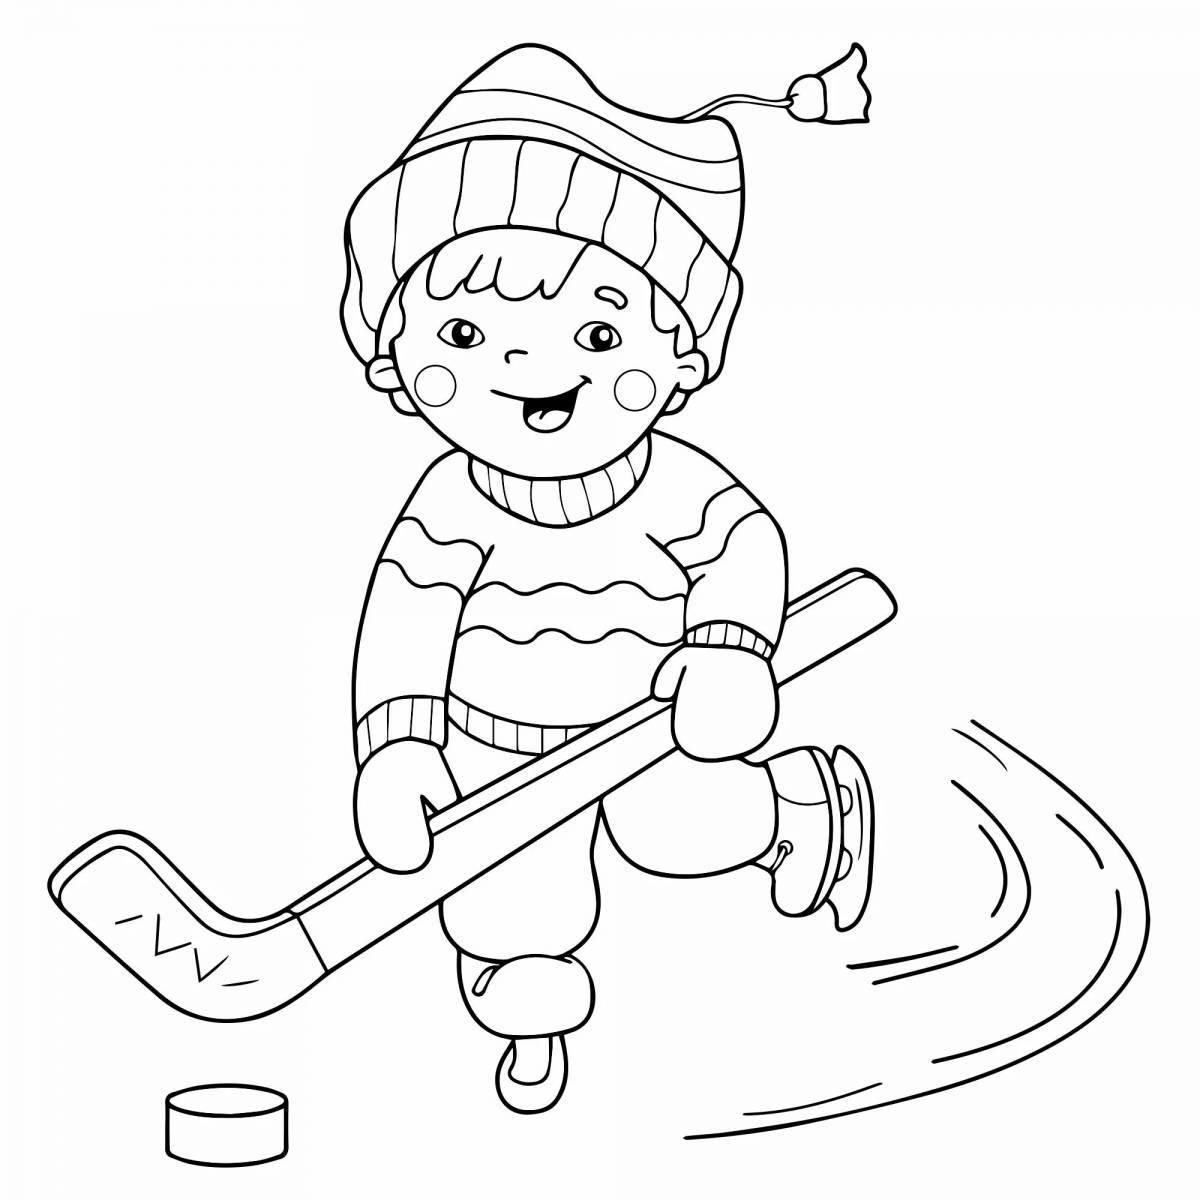 Radiant coloring page by numbers winter sports